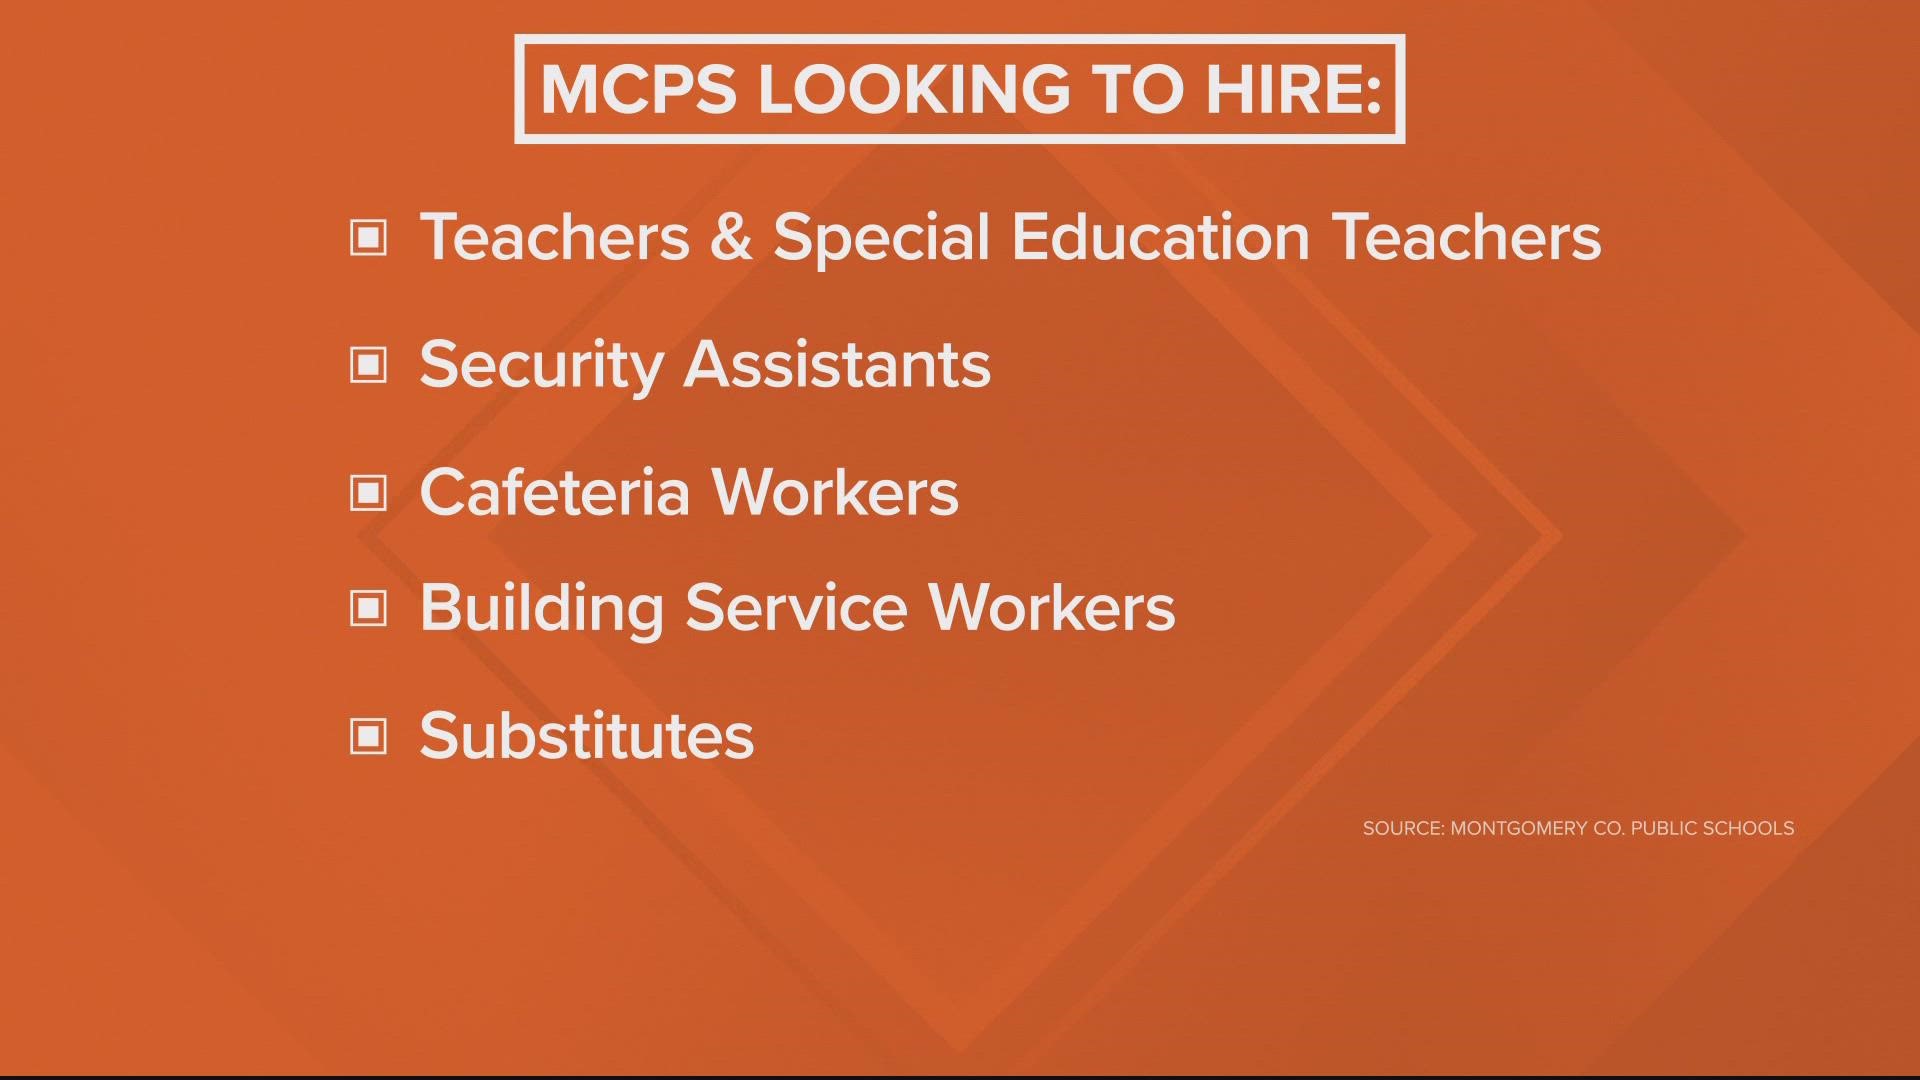 MCPS is looking to fill several vacancies before the school year begins.